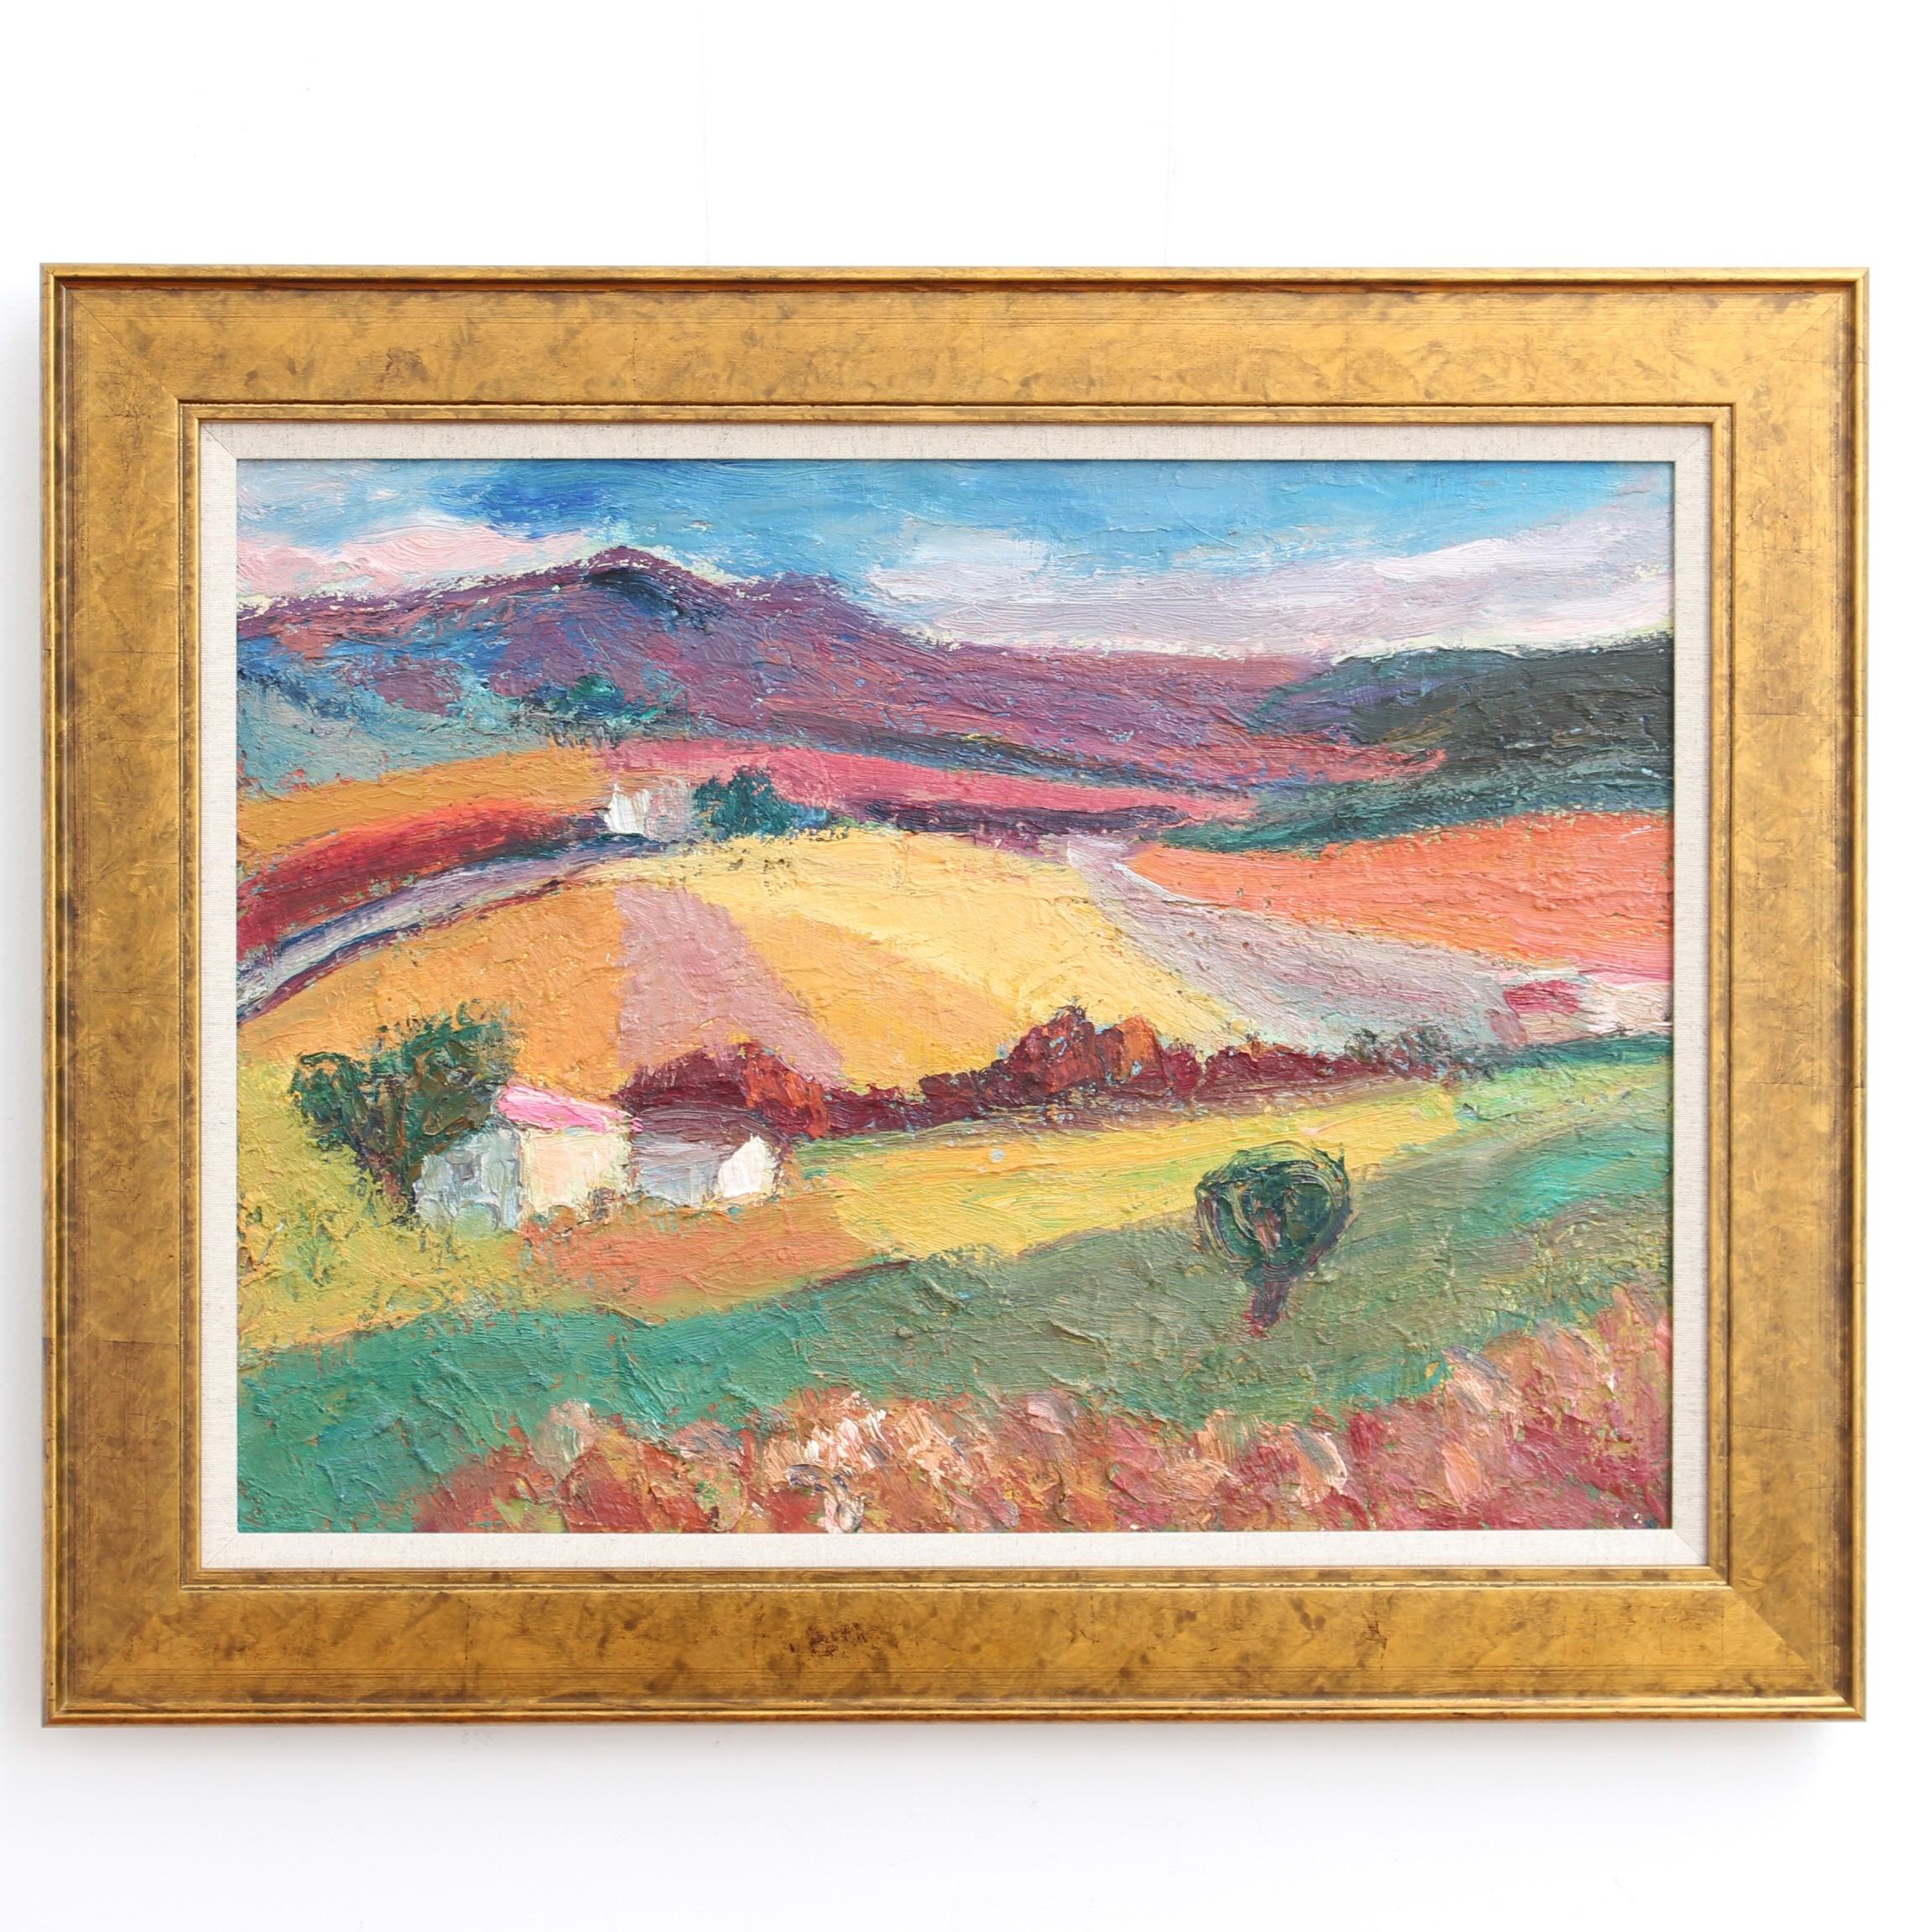 'Provençal Panorama', oil on board, by Anna Costa (circa 1950s). This is a unique landscape painted by the artist in vibrant colours in an Impressionist style. A traditional home sits in the foreground of the fields which are exploding in colour. A